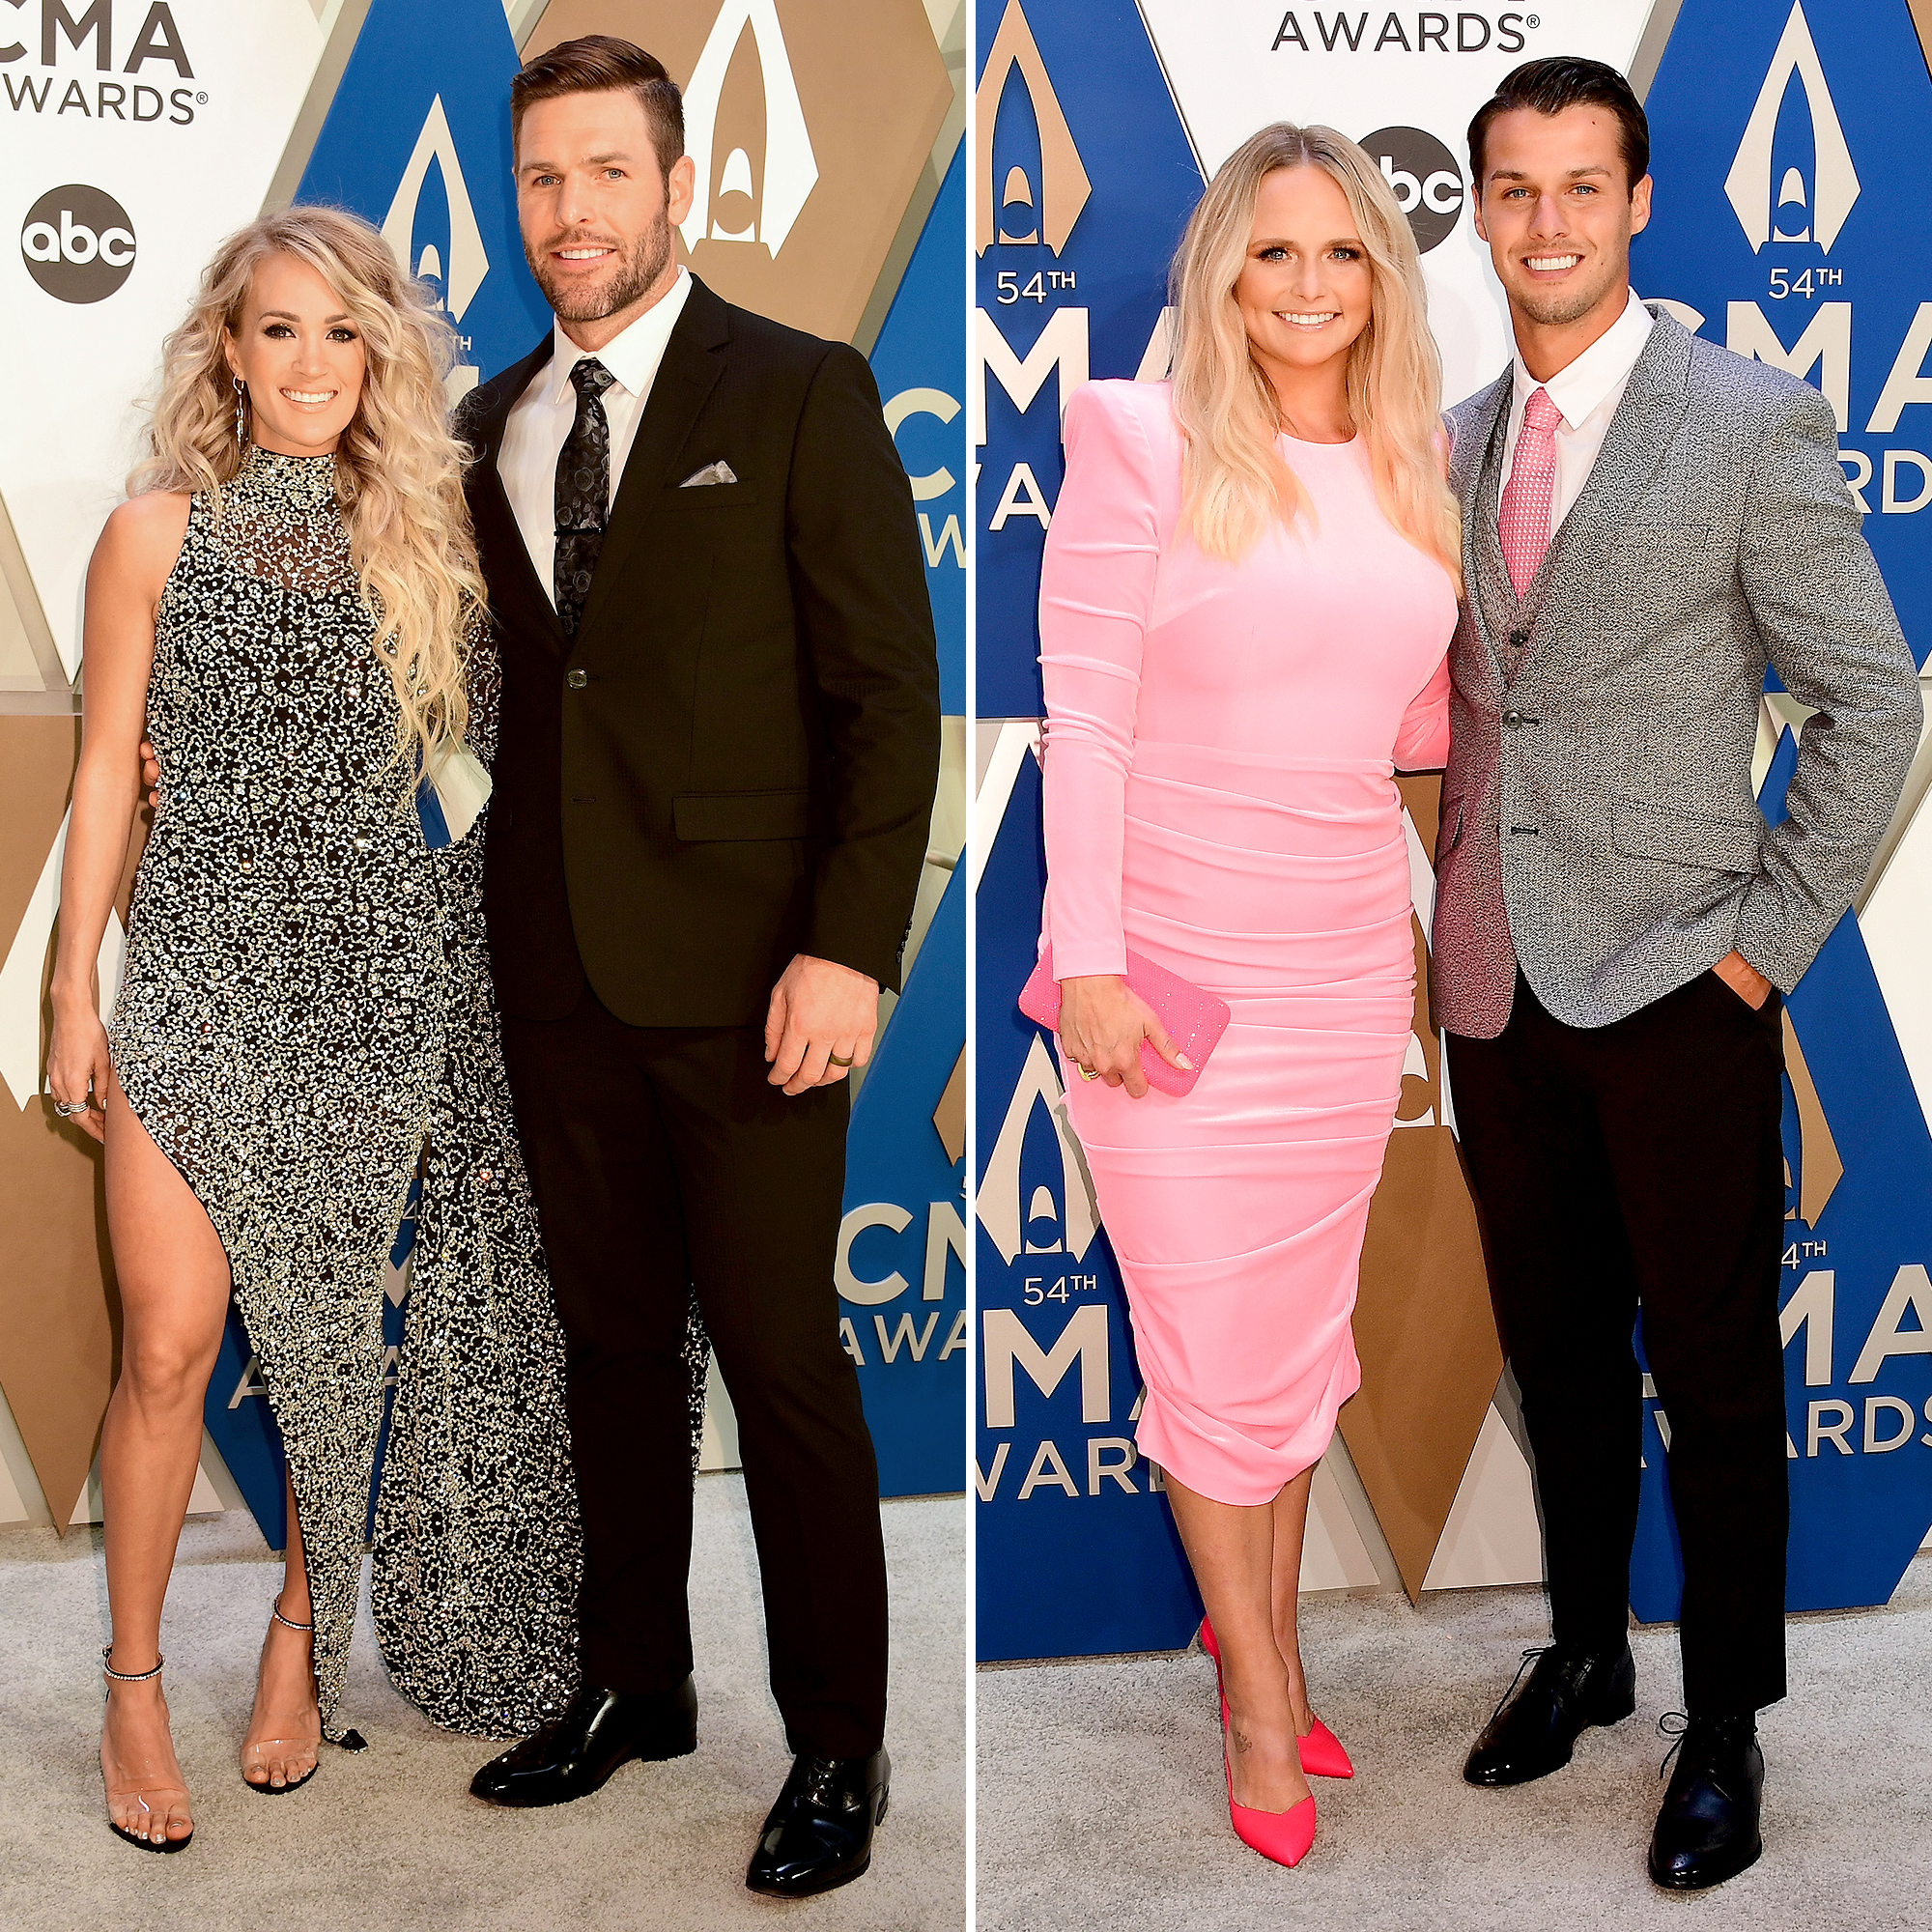 CMAs 2020: Carrie Underwood and Mike Fisher, More Couples Attend